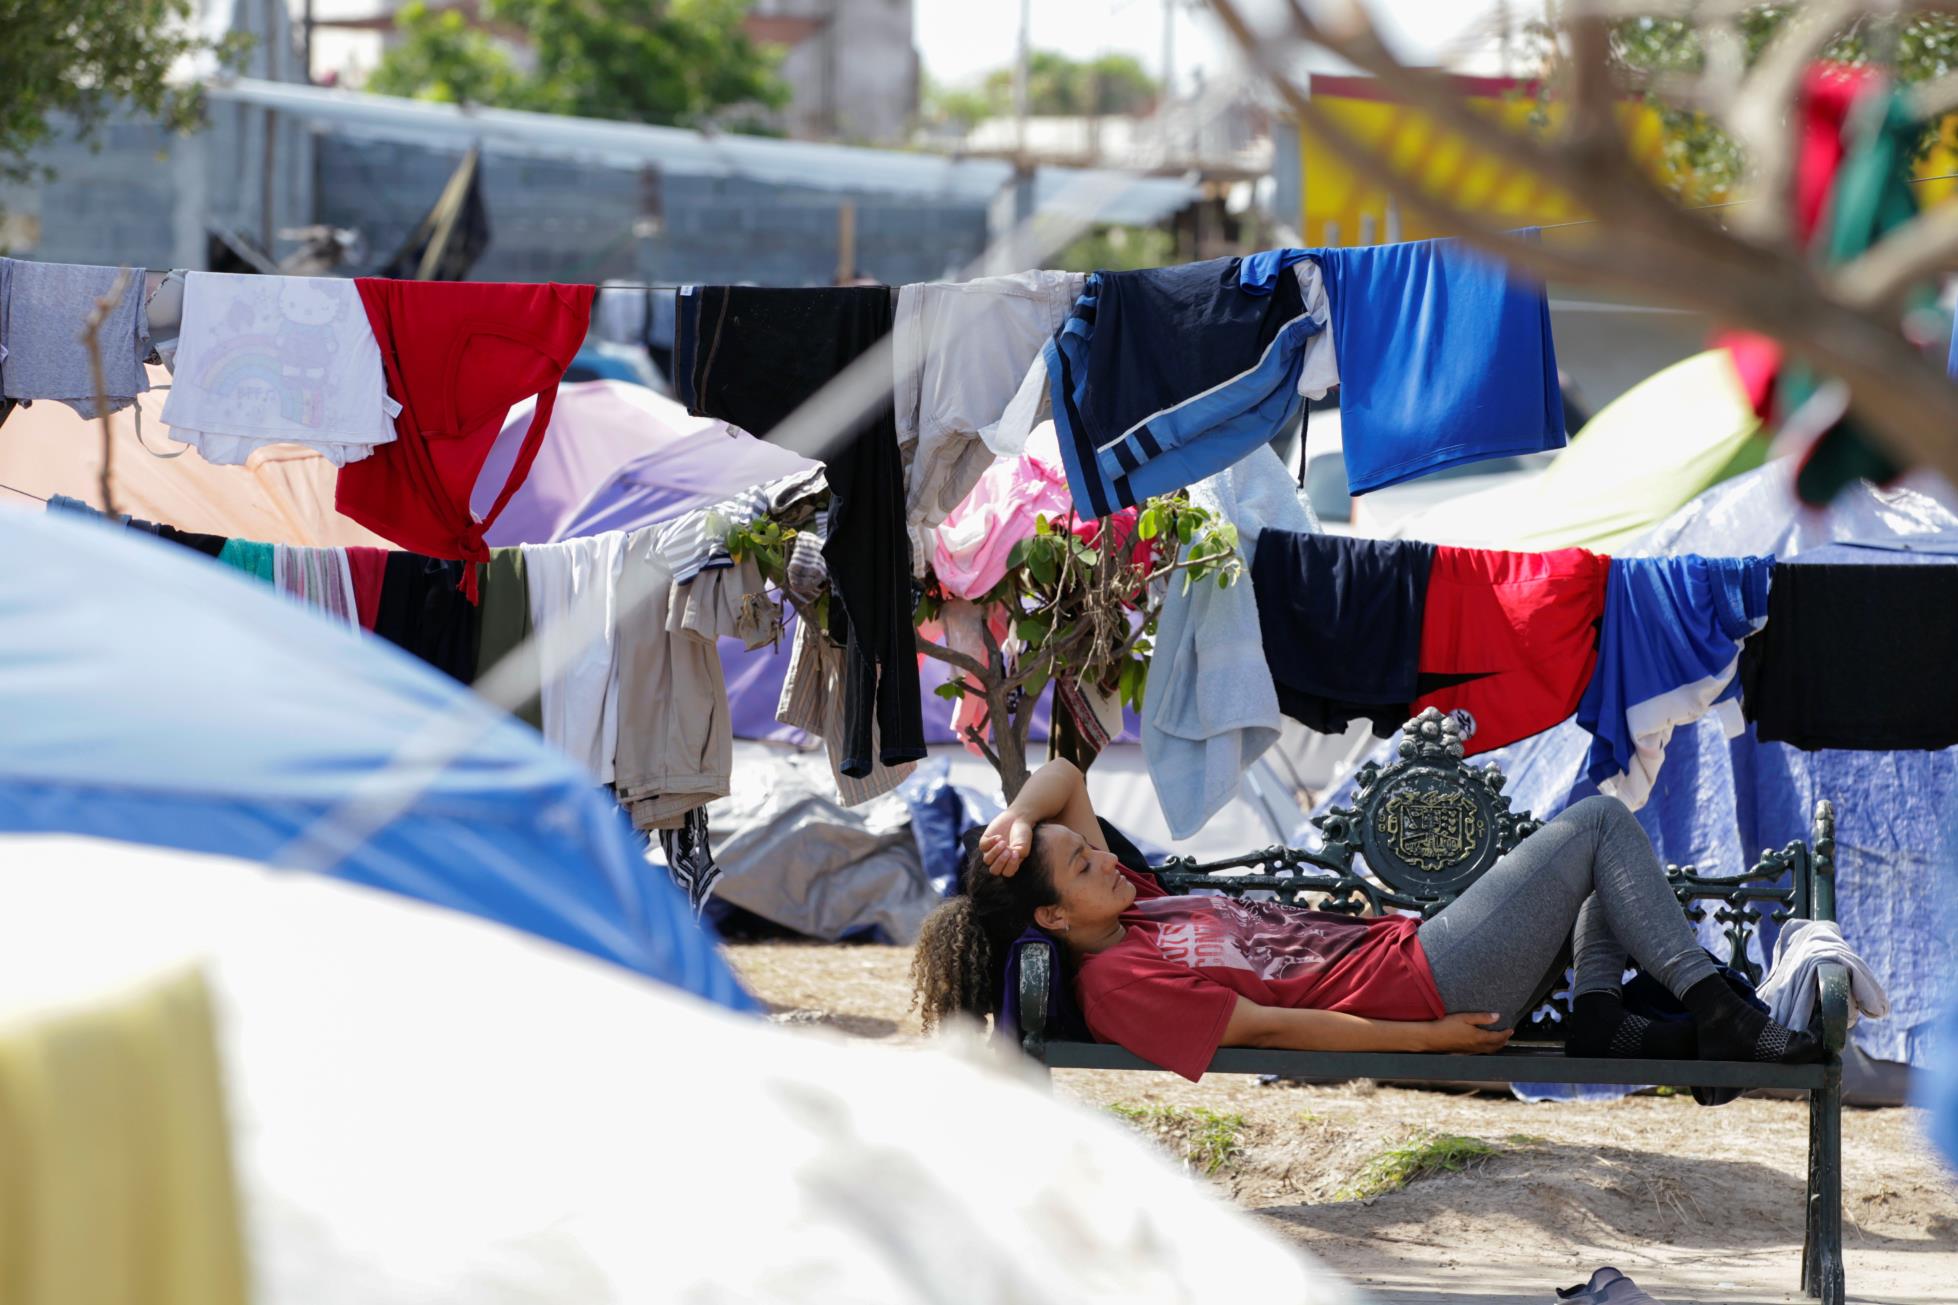 An asylum-seeking migrant, who was apprehended and returned to Mexico under Title 42 after crossing the border from Mexico into the U.S., rests in a public square wher<em></em>e hundreds of migrants live in tents, in Reynosa, Mexico June 9, 2021. Picture taken June 9, 2021. REUTERS/Daniel Becerril